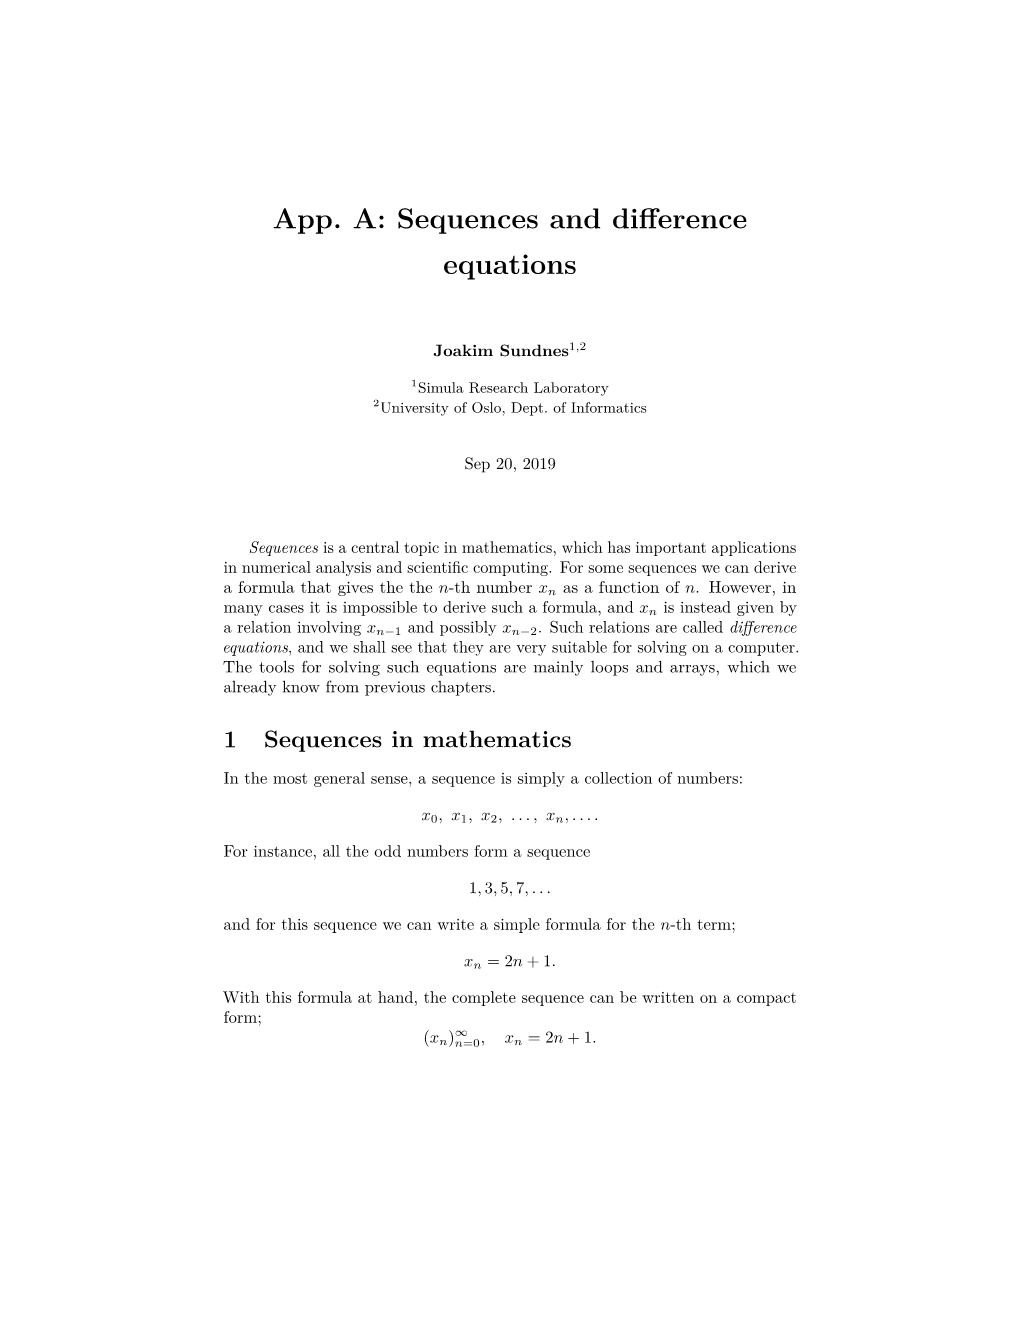 Sequences and Difference Equations